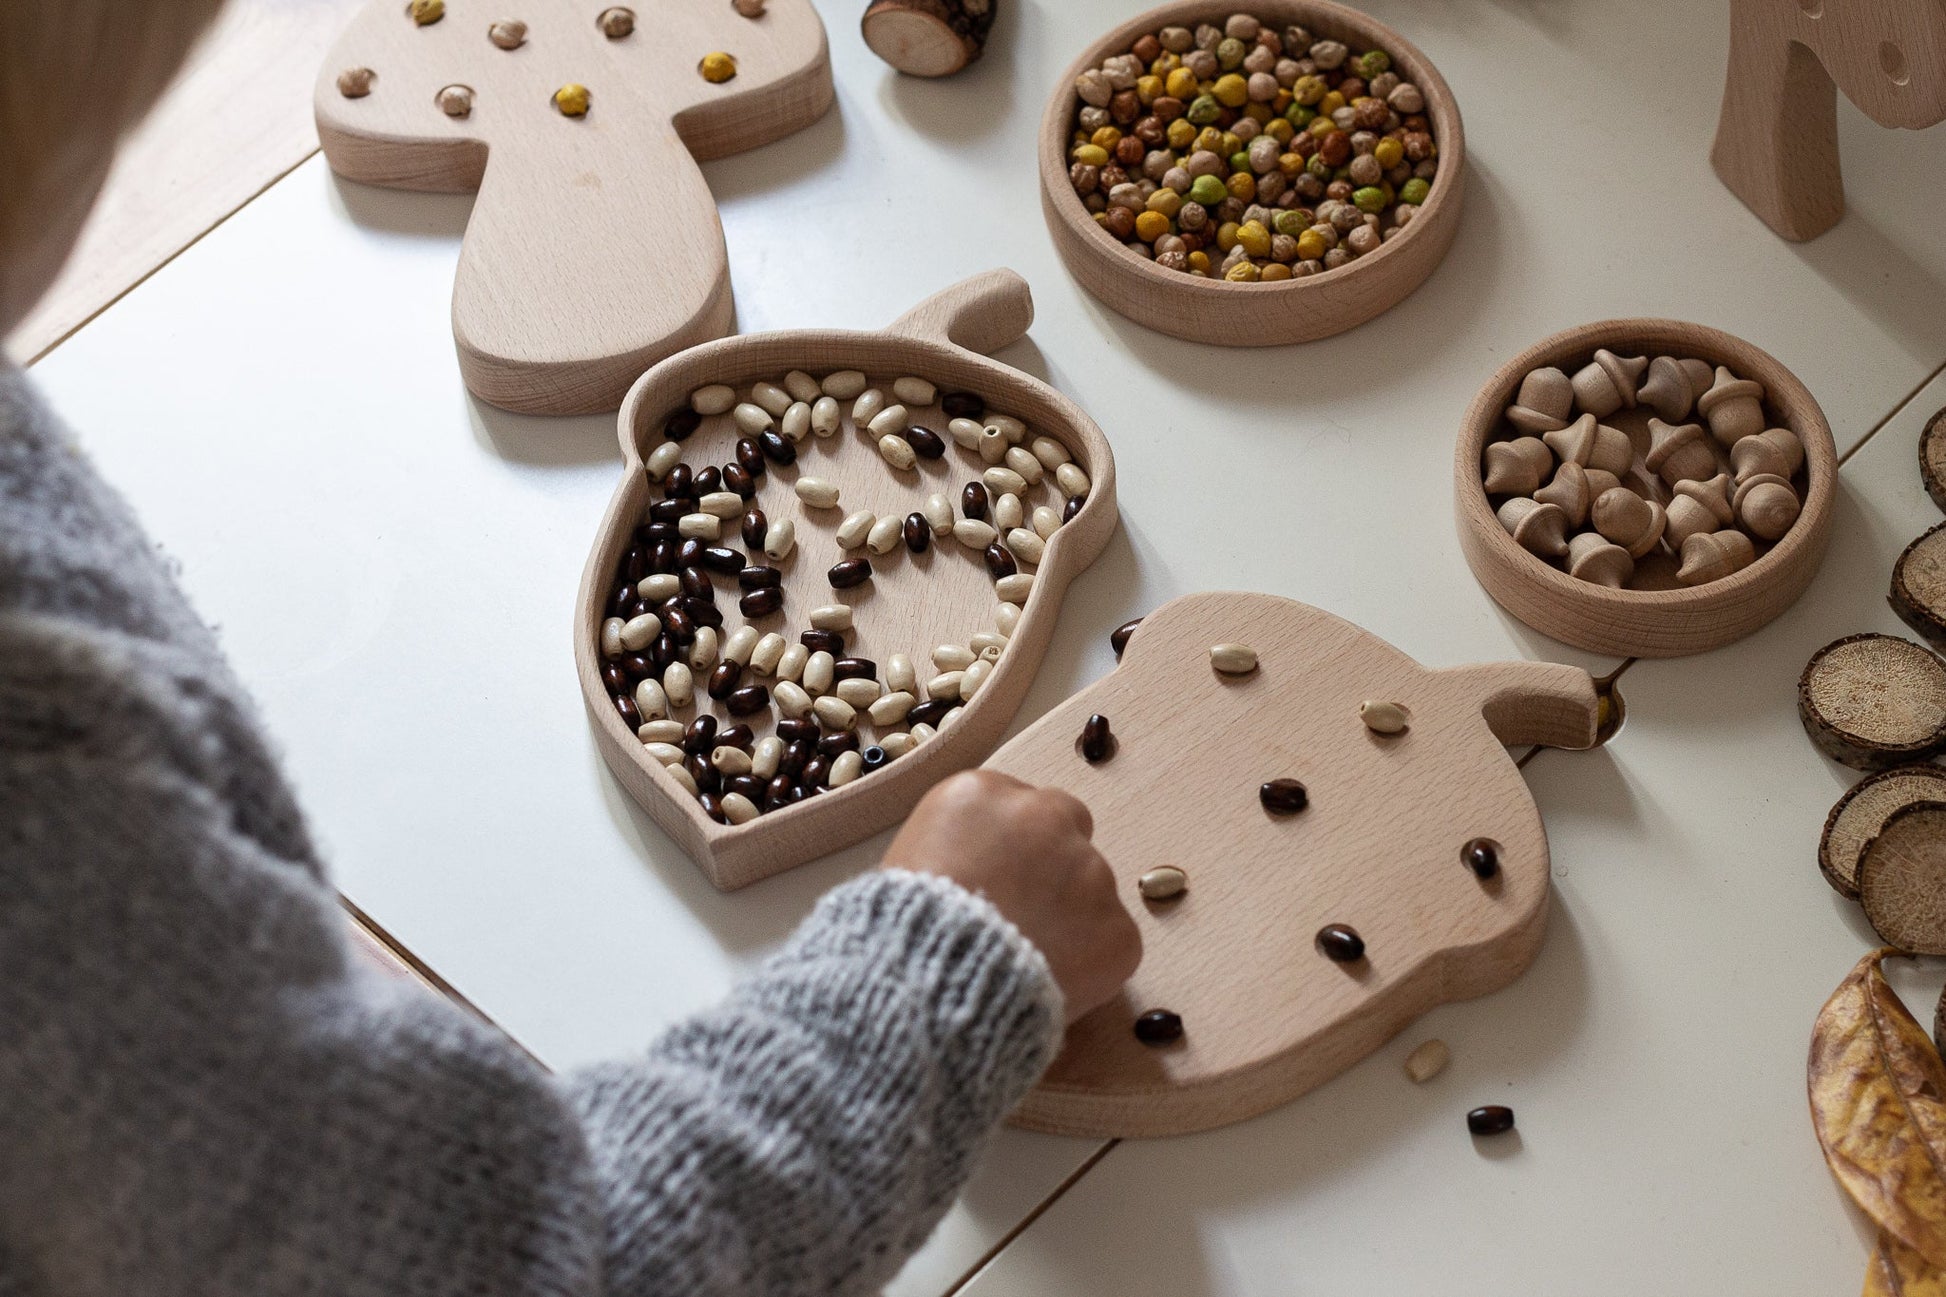 Acorn Sorting Tray with beans and lentils